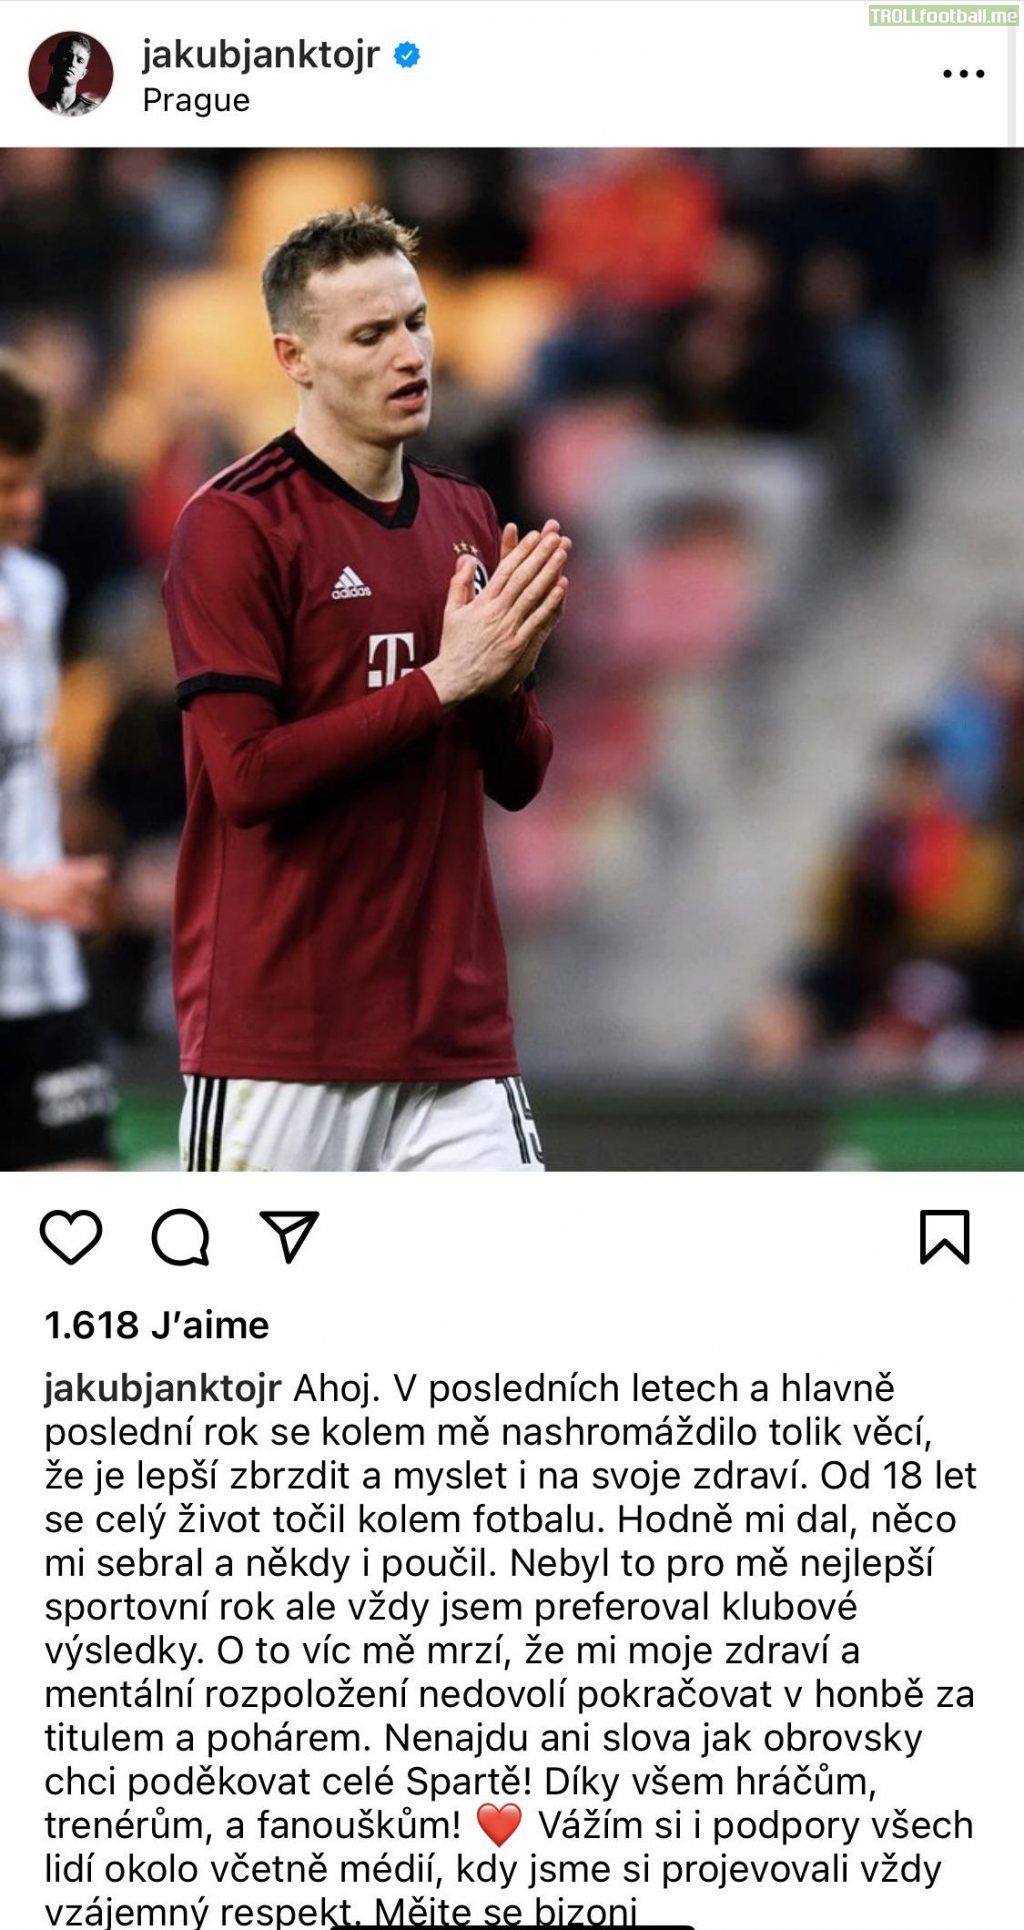 [Jakub Jankto] Statement to being excluded from AC Sparta's squad